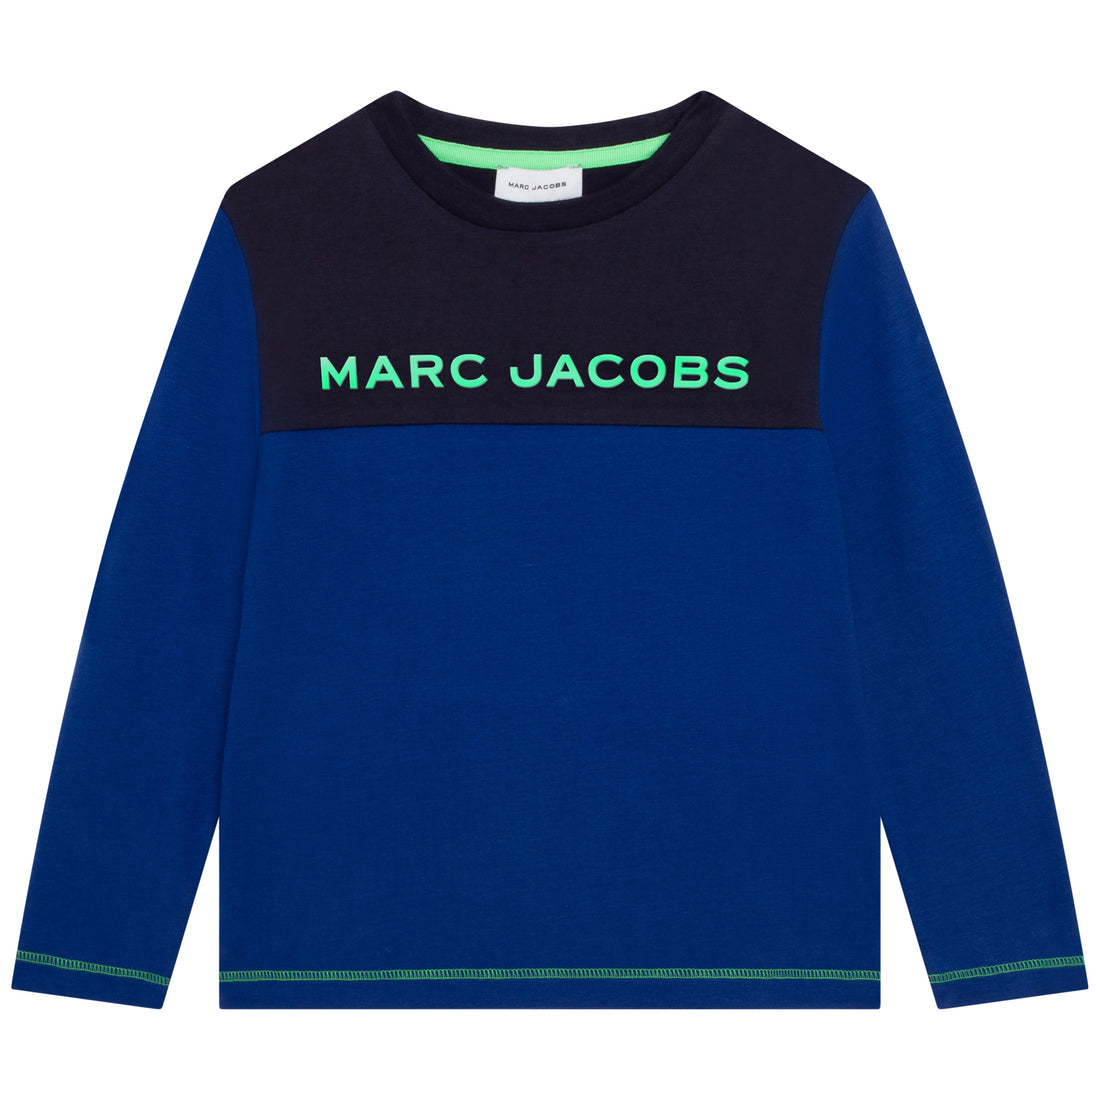 The Marc Jacobs Long Sleeve T-Shirt Style: W25544